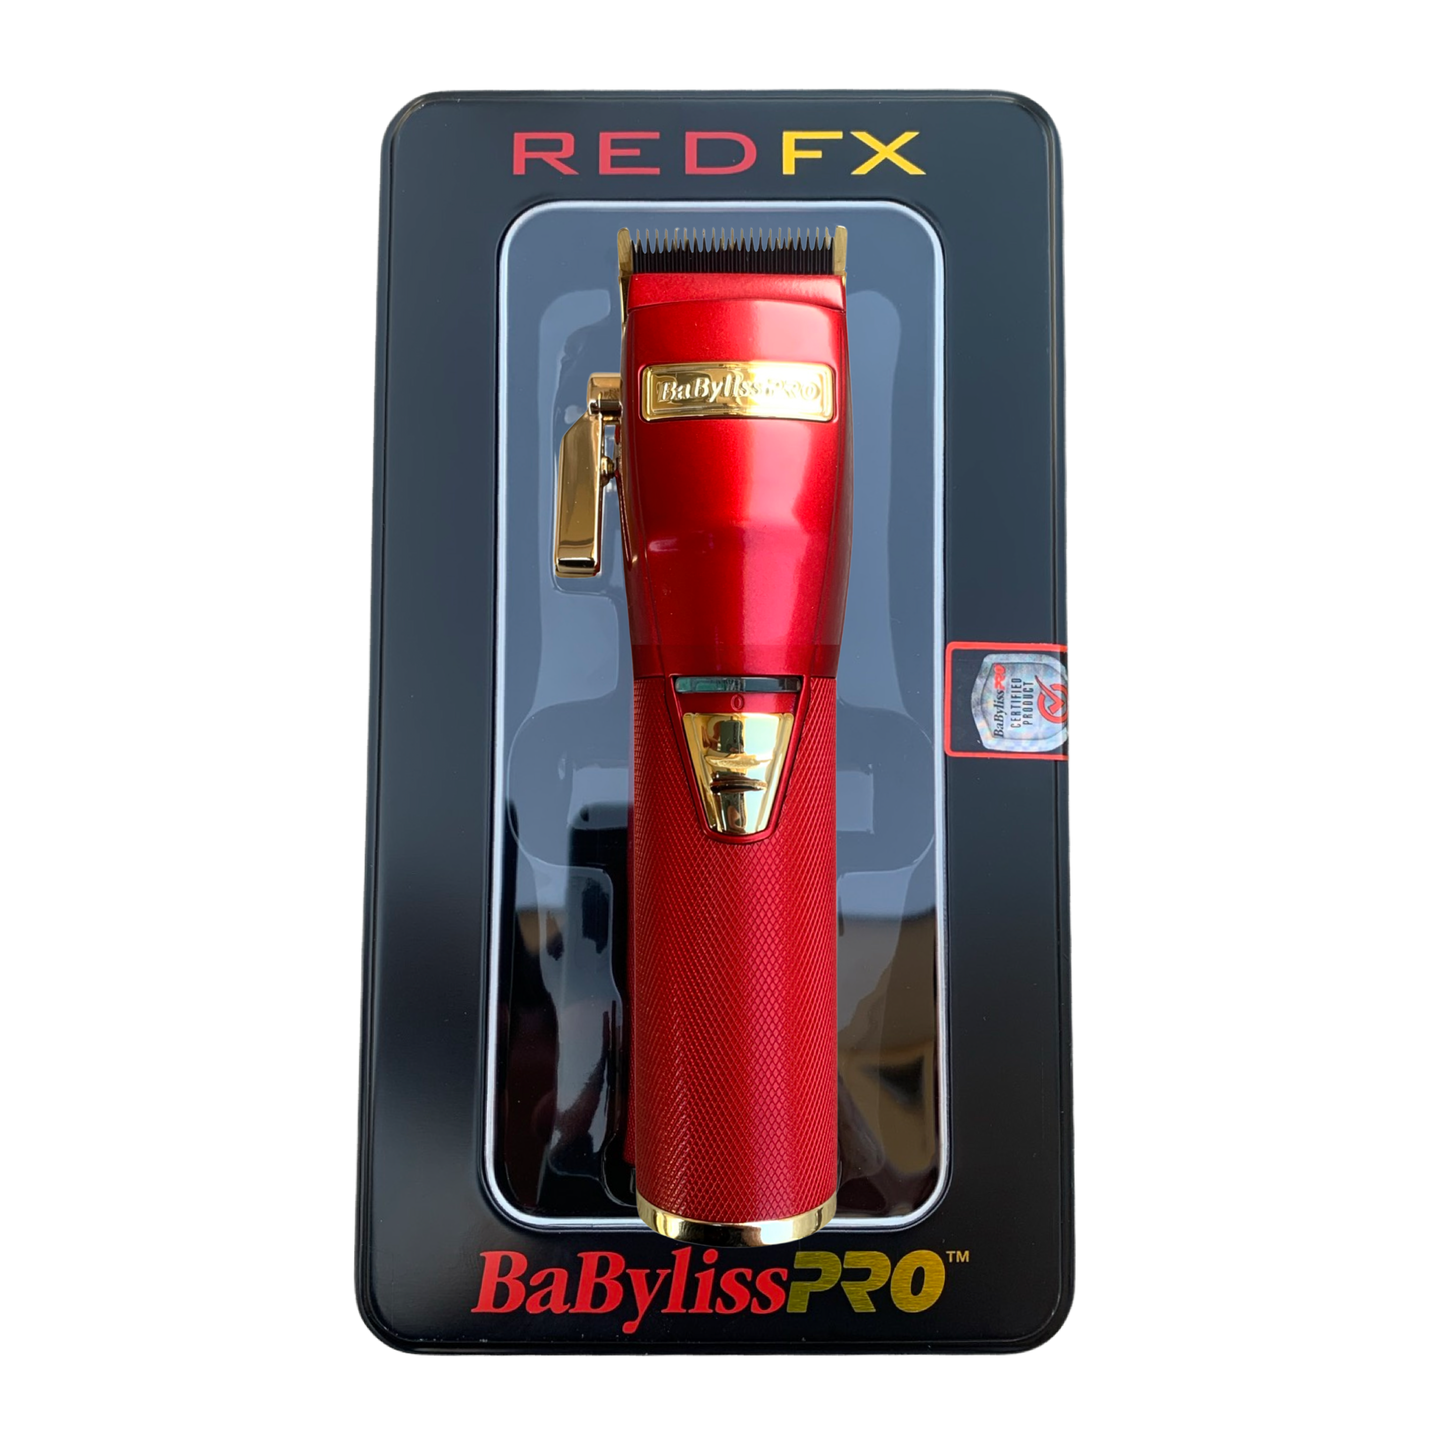 Babyliss fx clipper RED